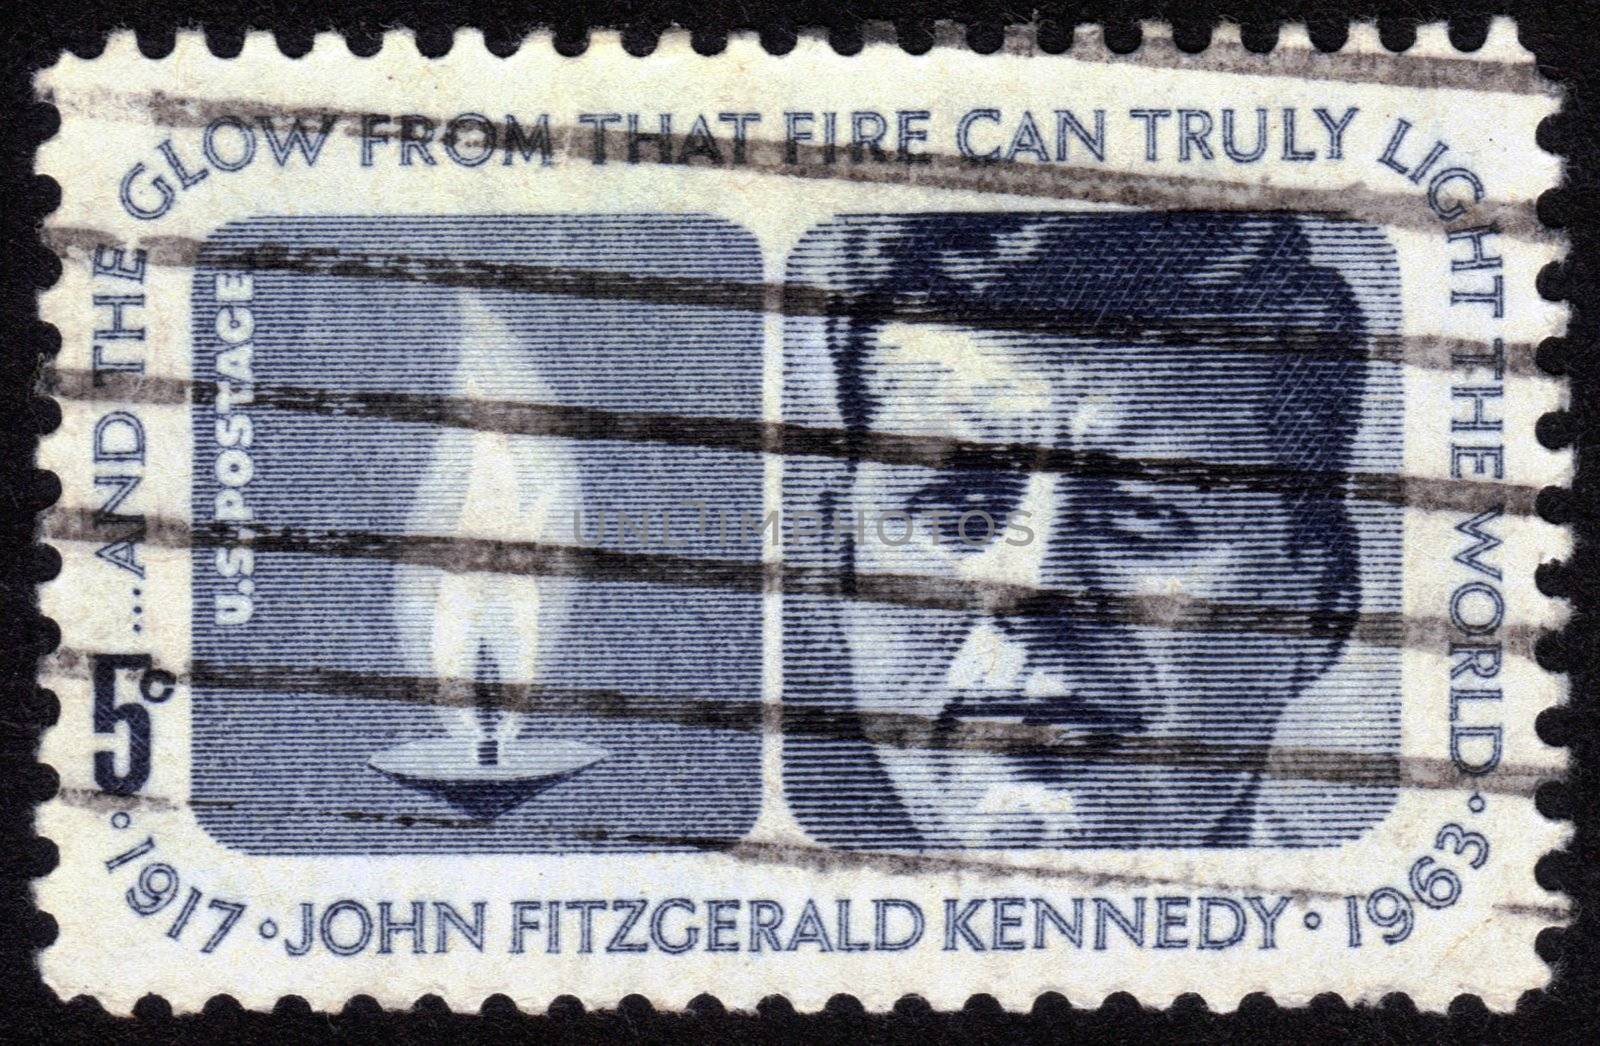 UNITED STATES OF AMERICA - CIRCA 1964: a stamp printed in the United States of America shows President  John Fitzgerald Kennedy (1917-1963) and Eternal Flame, circa 1964